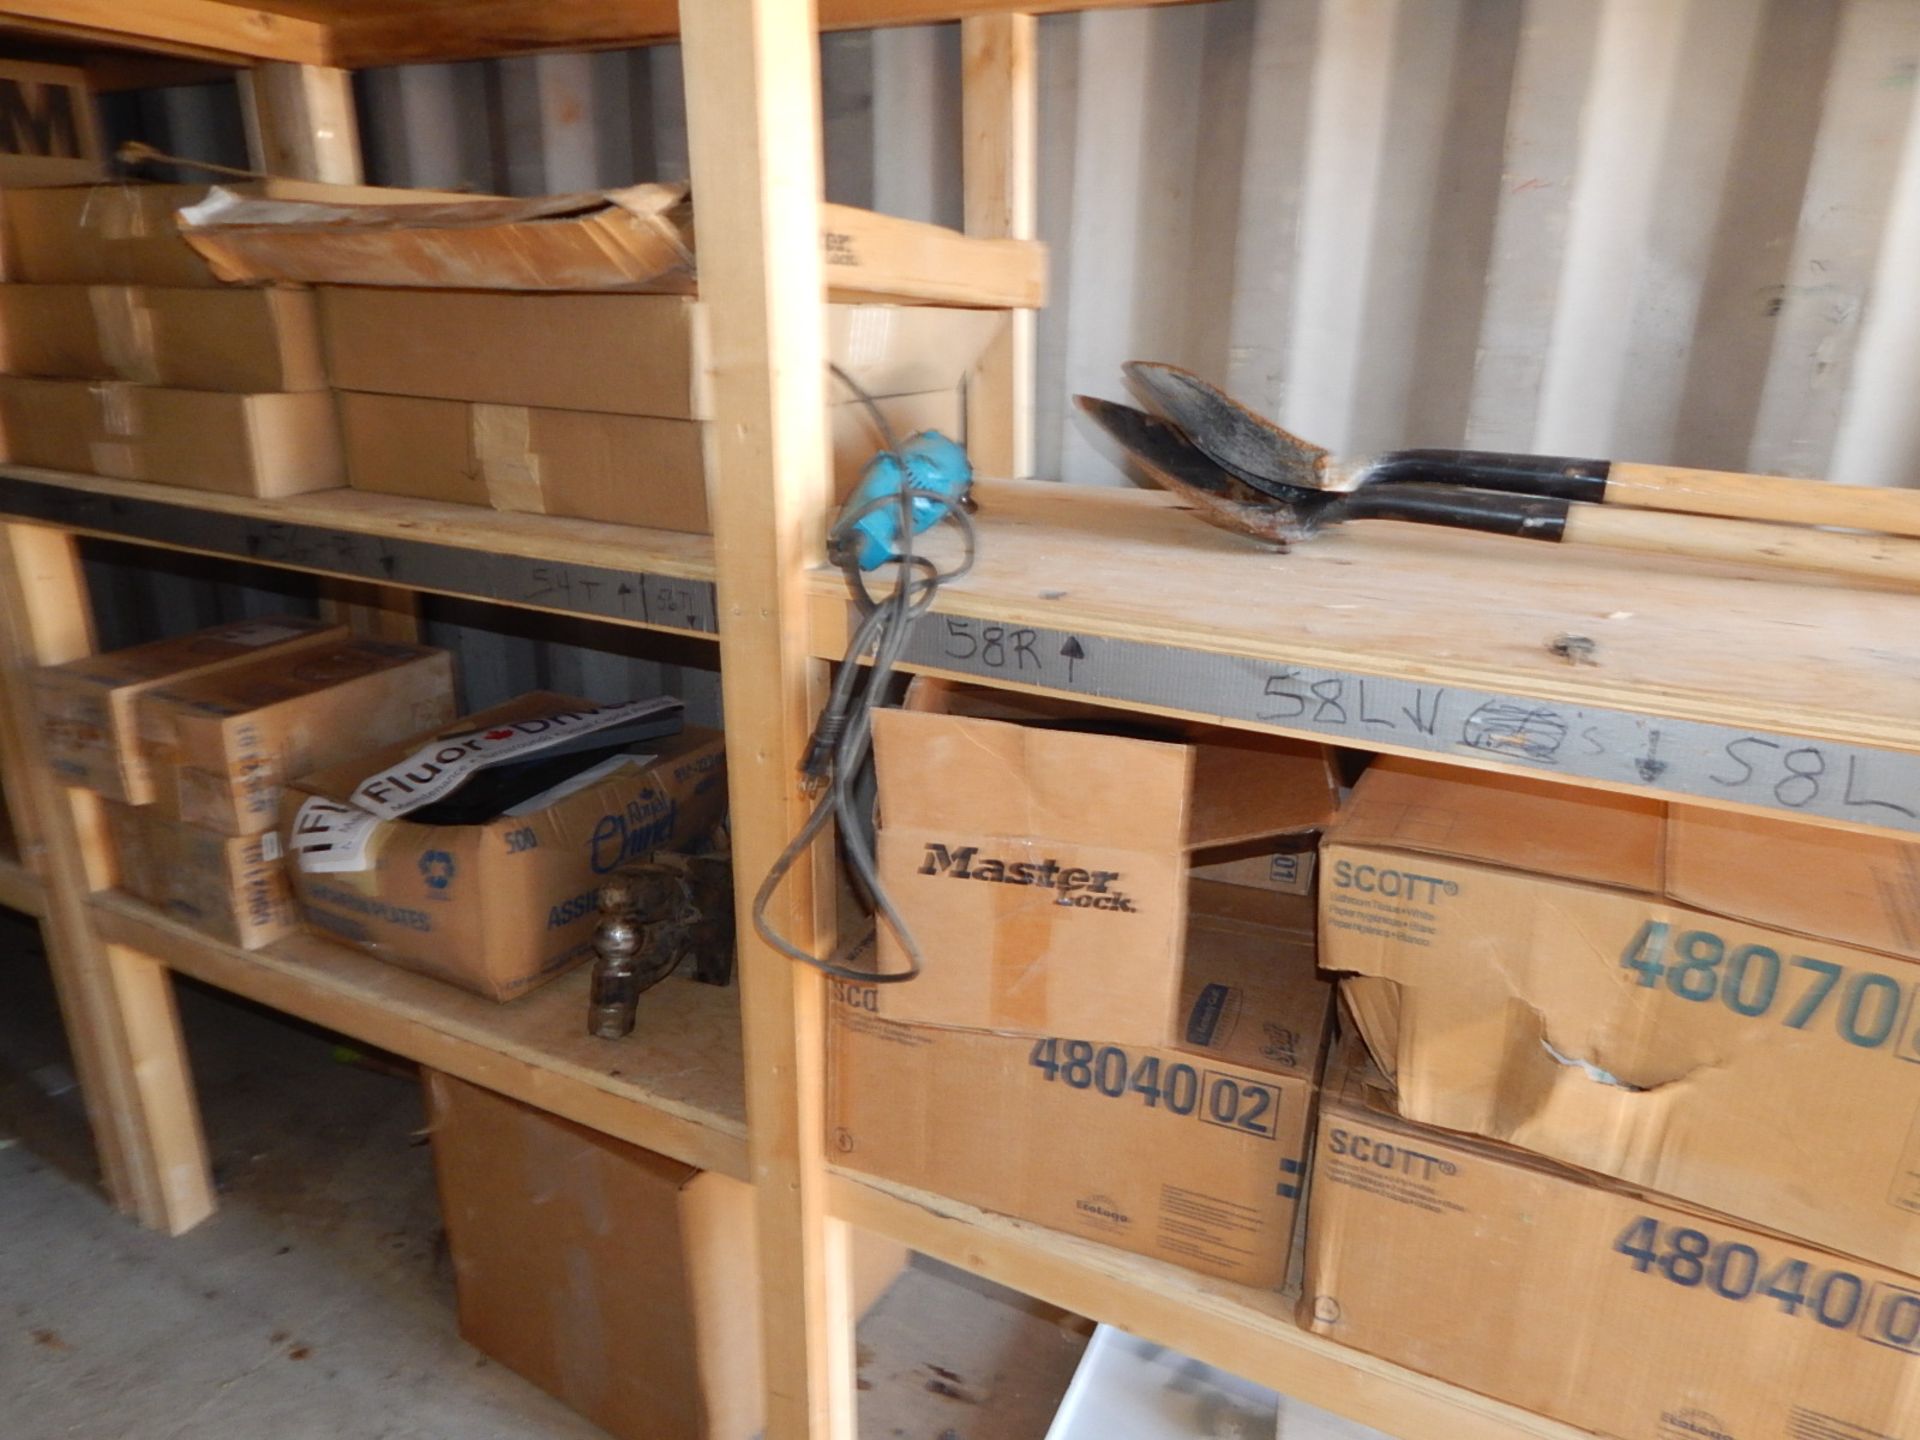 LOT/ CONTENTS OF CONTAINER CONSISTING OF FURNITURE, HARDWARE, CABINET, AND ADJUSTABLE RACKING - Image 4 of 8